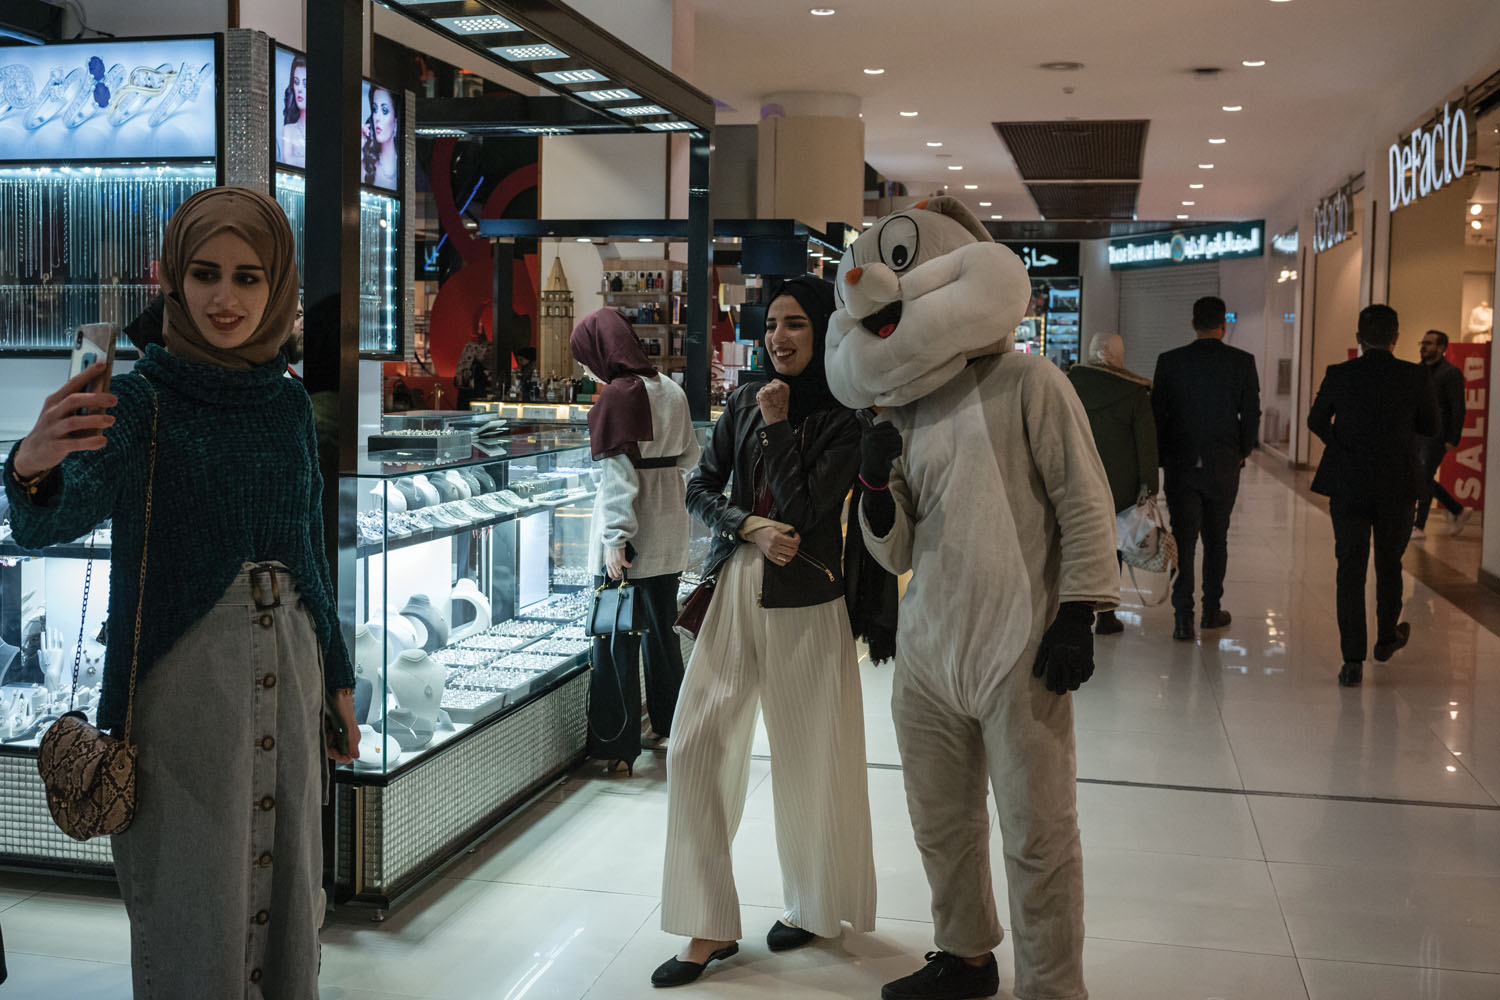 Abdulkarim, who has a substantial online following, works at the local mall as a mascot. Following the 2003 US invasion of Iraq, his educational and employment opportunities have been limited.